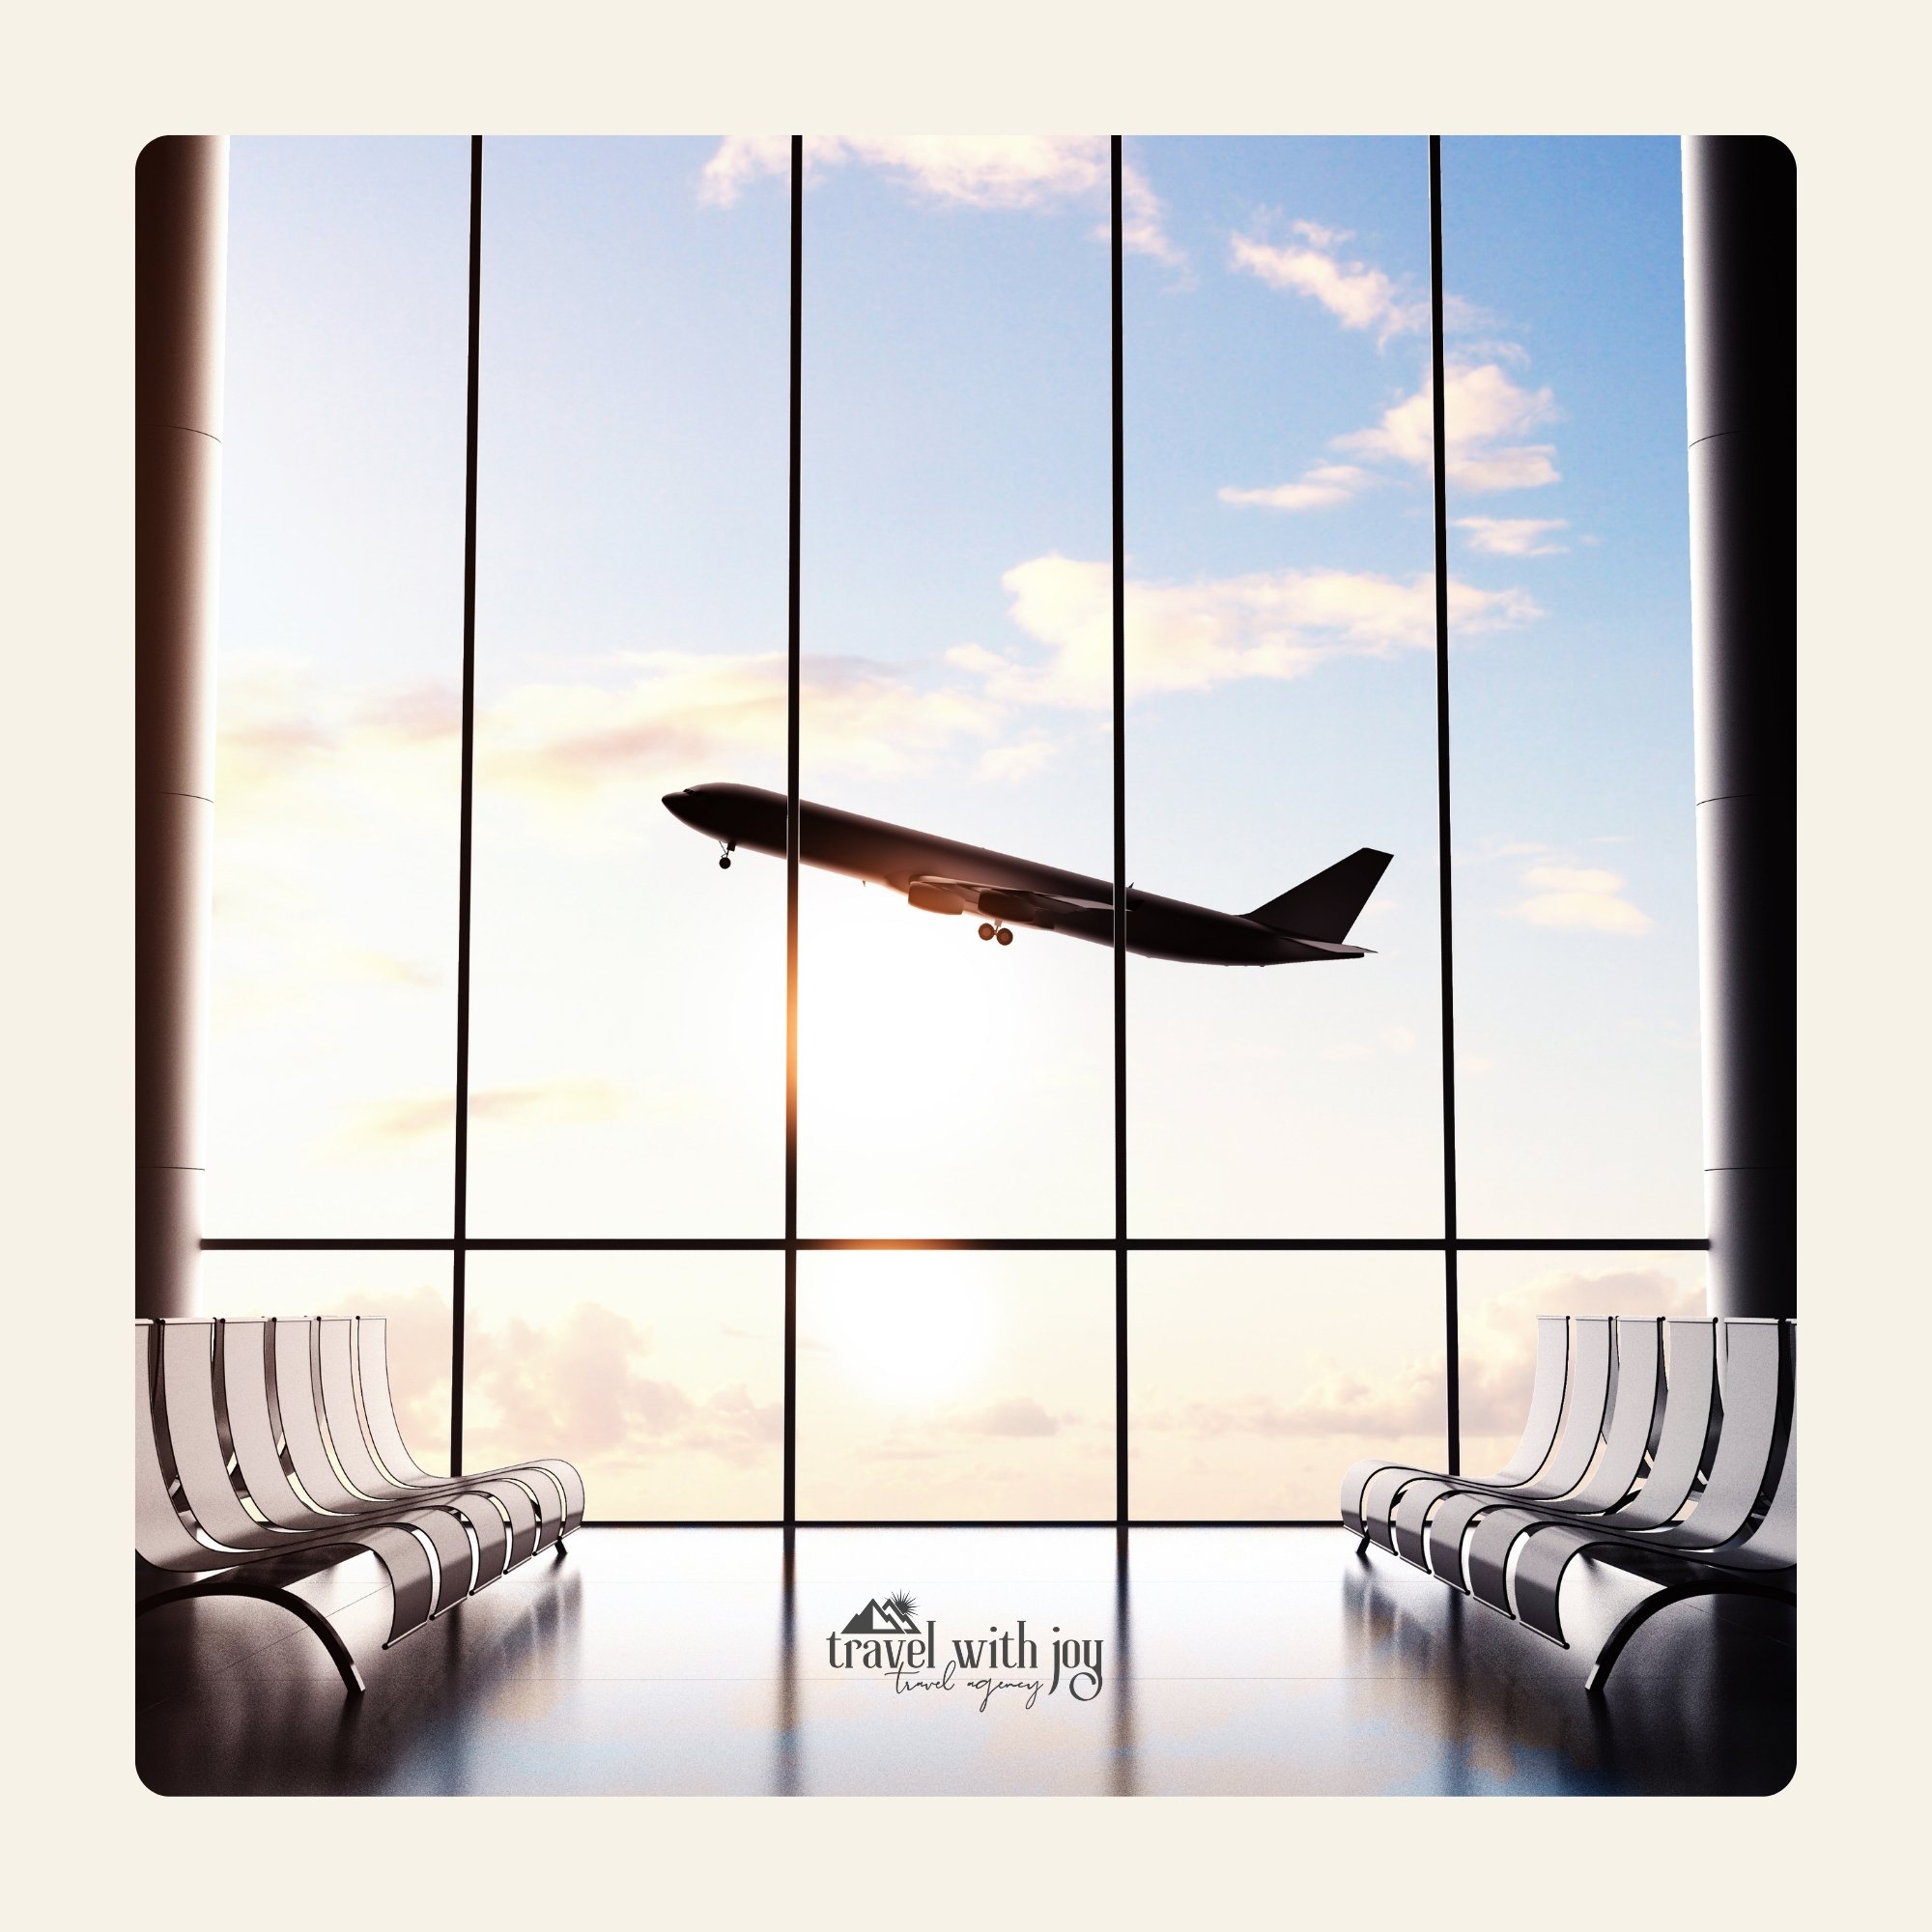 Travel tip Thursday. ✨

Reduce the impact of your flight. ✈️

Air travel significantly impacts climate change. Opting for alternatives like train travel is crucial for sustainable planning. If flying is necessary, choose economy class, eco-friendly a